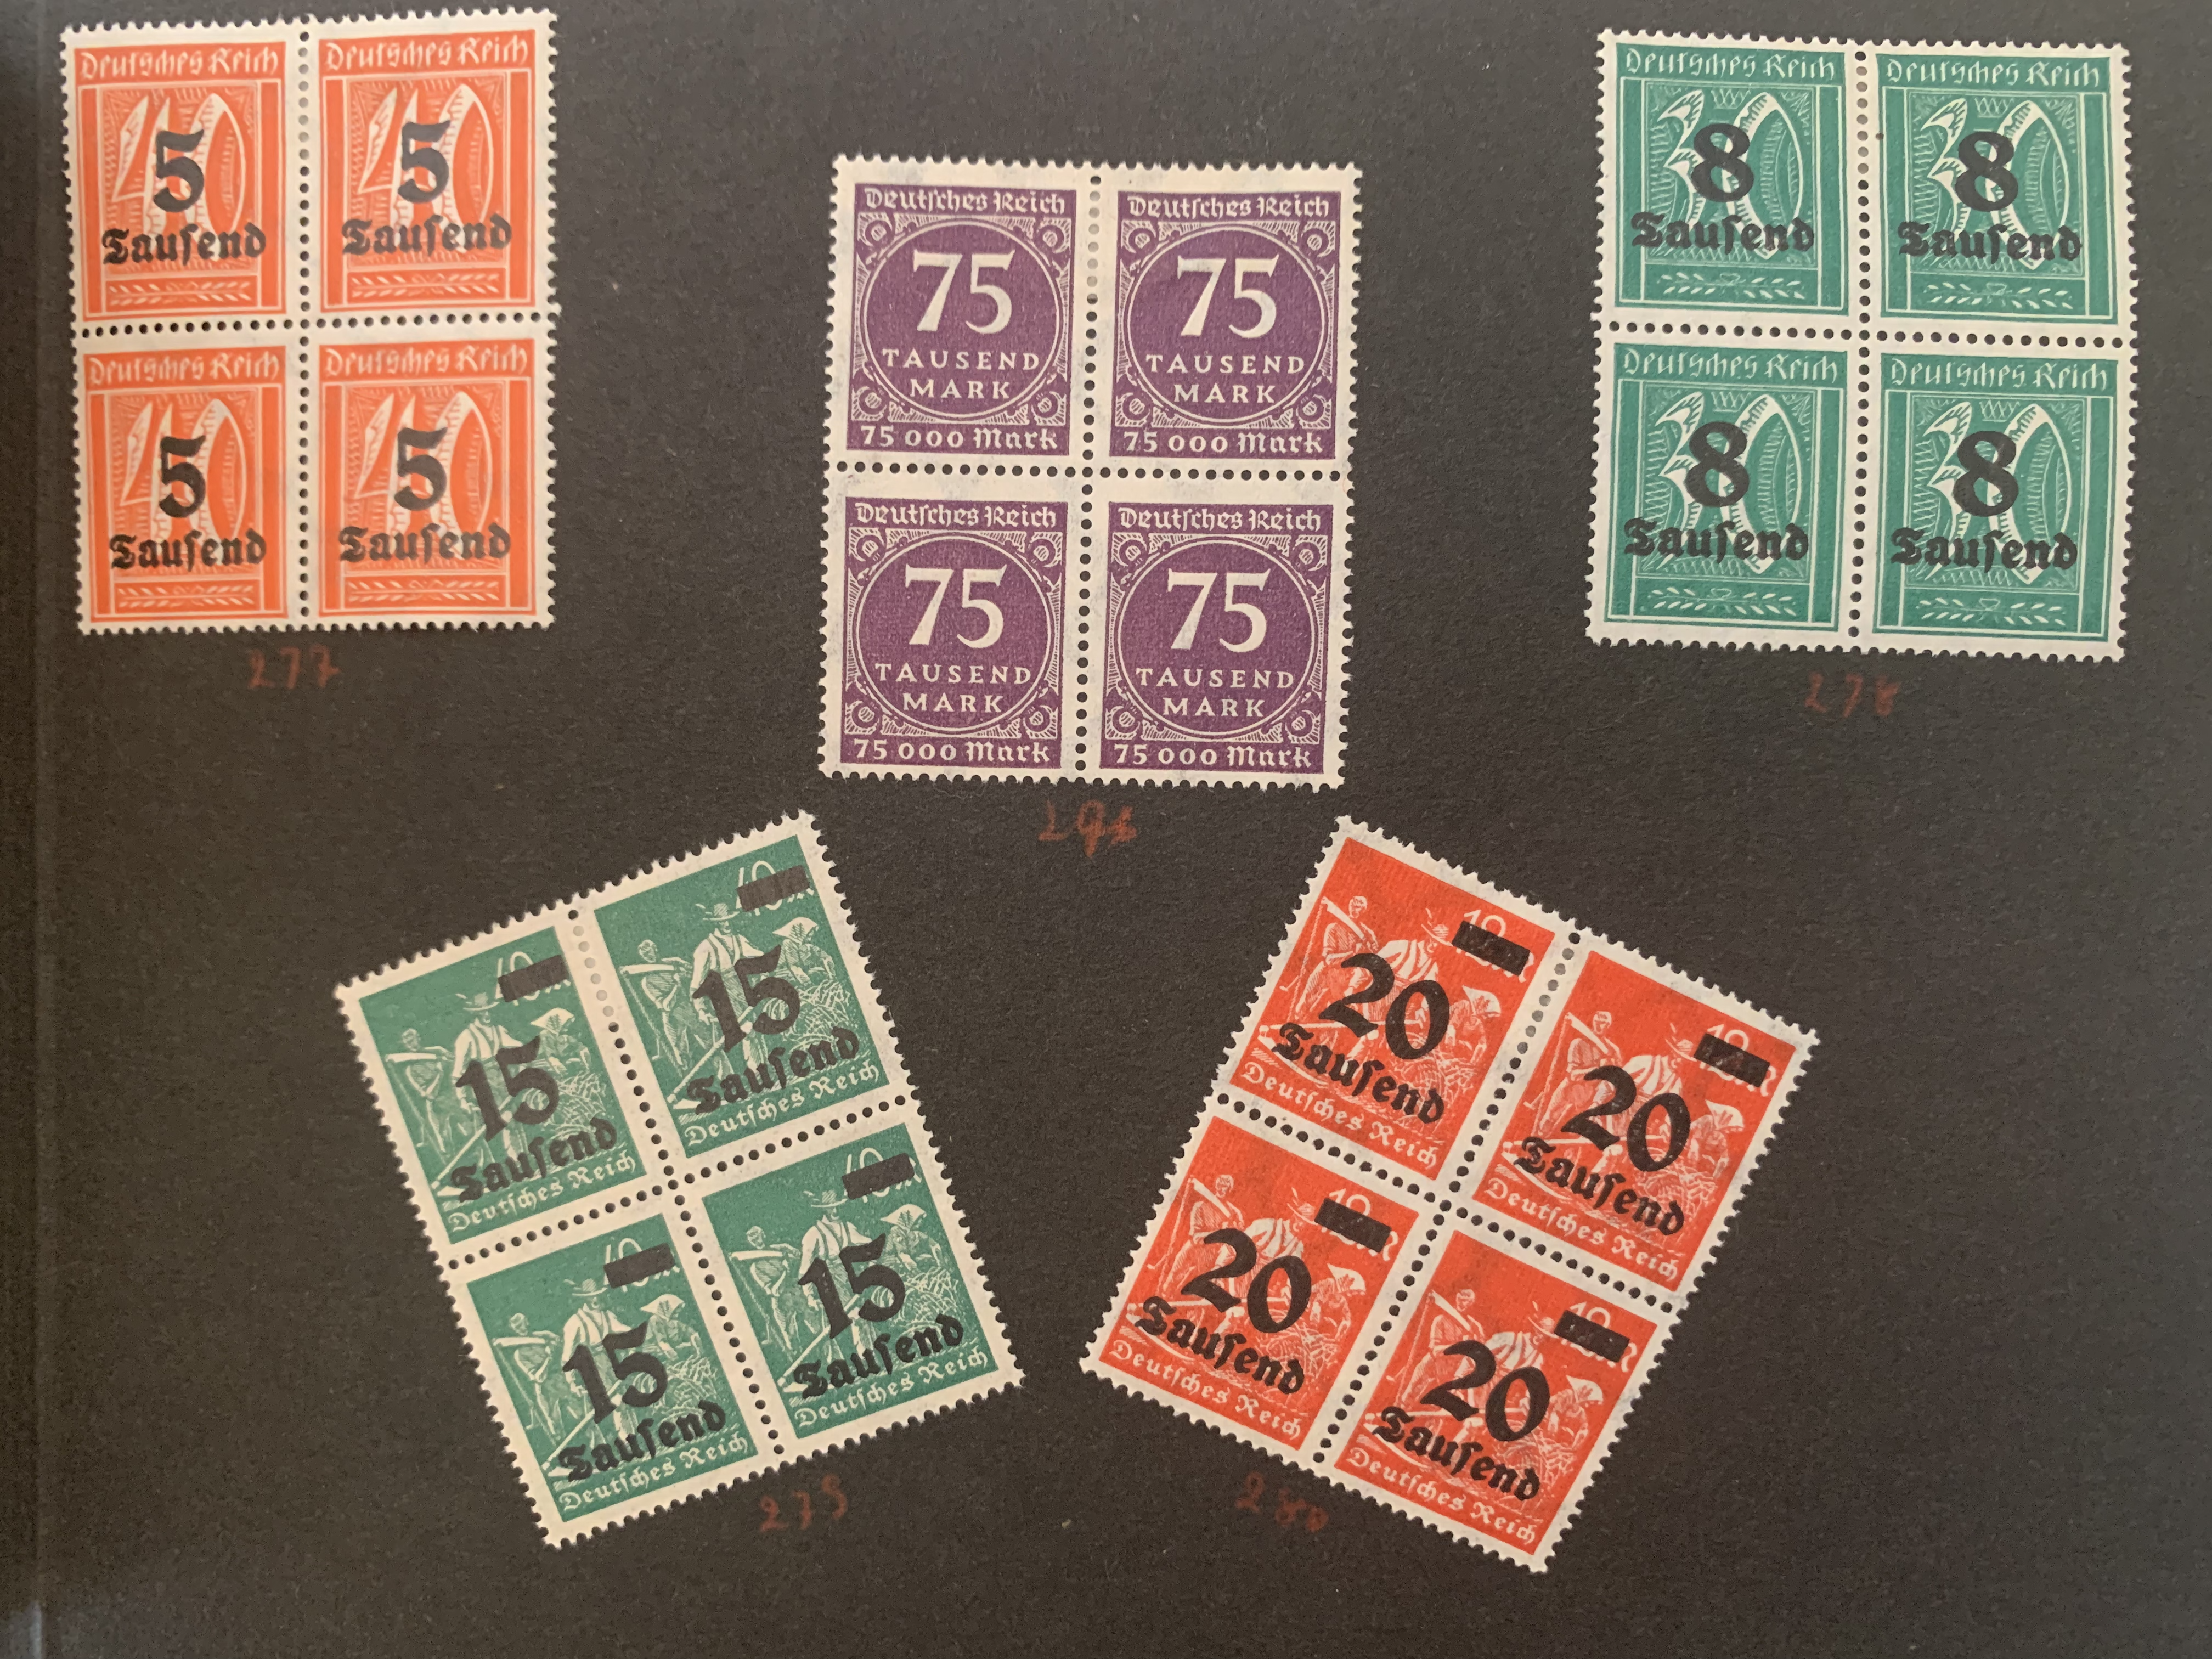 Overprinted stamps during German hyperinflation